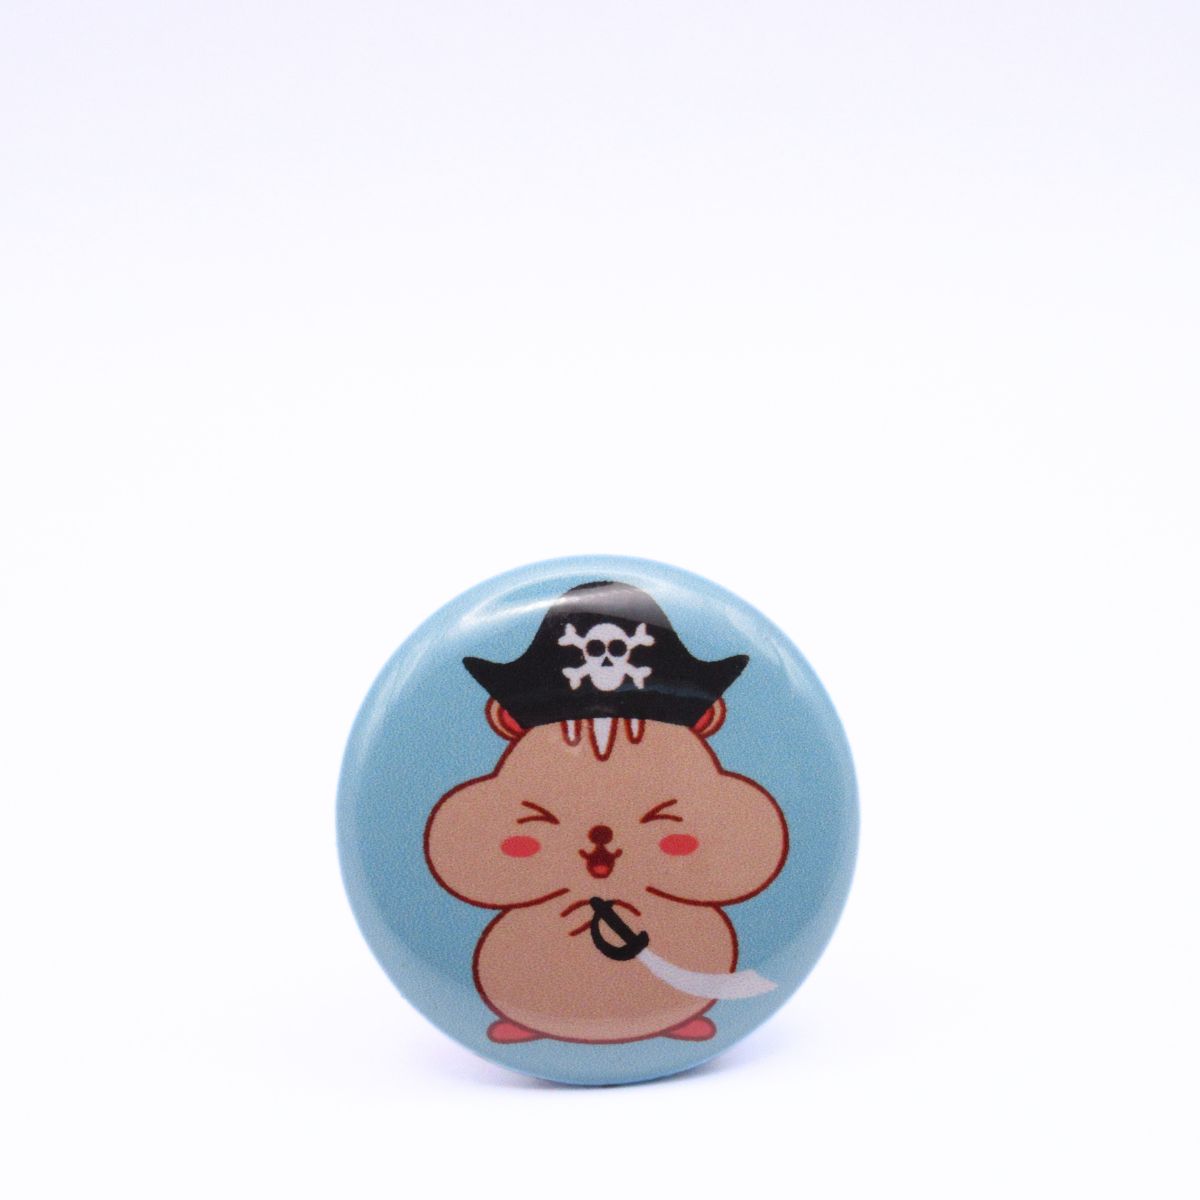 BooBooRoo Pinback Button (i.e. button, badge, pin) of a cute hamster dressed like a pirate